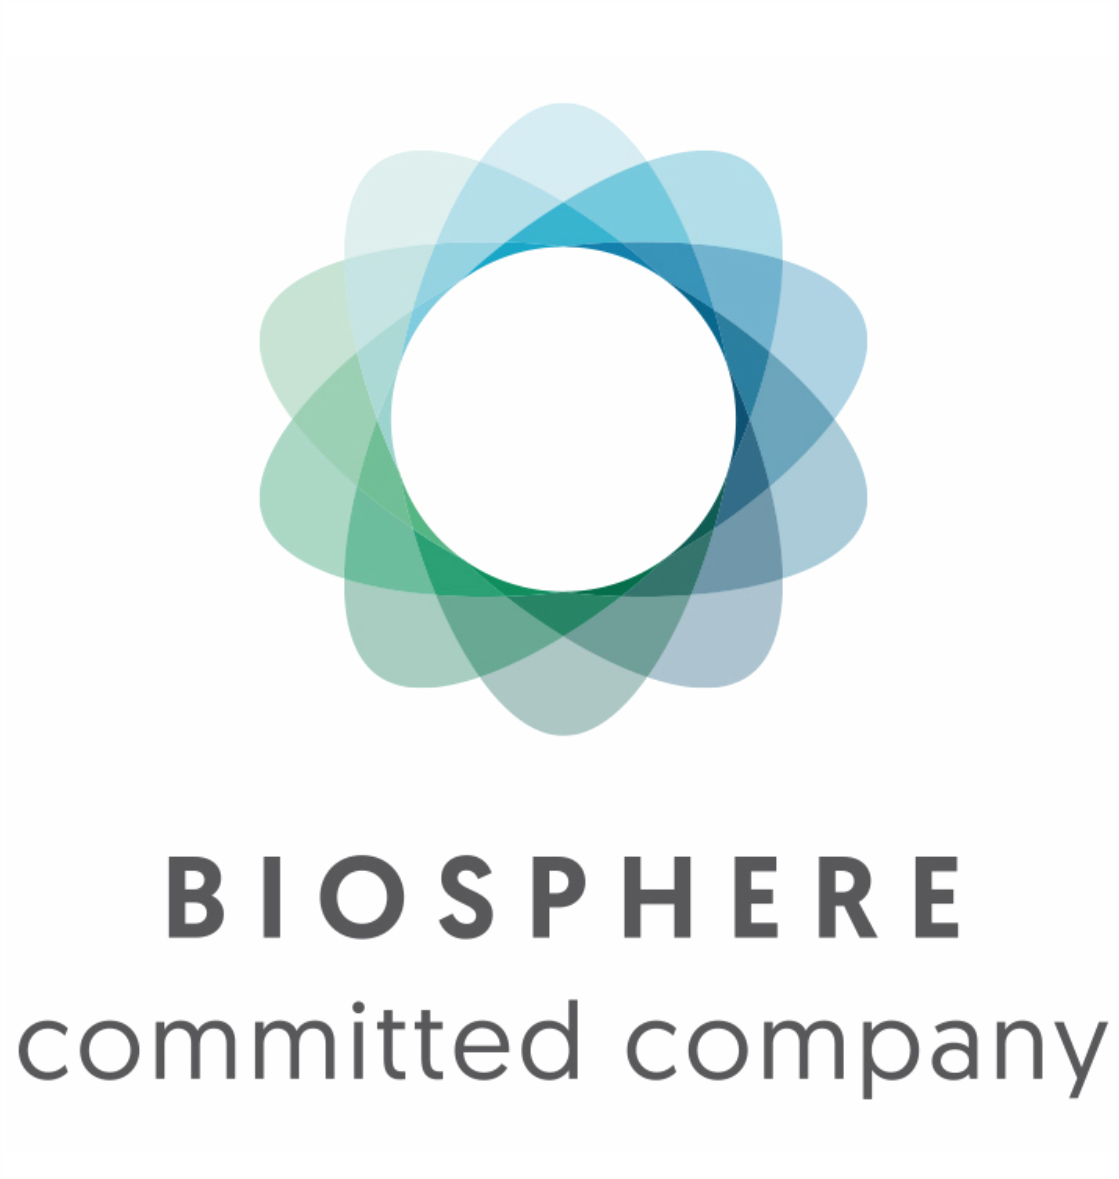 biosphere committed company